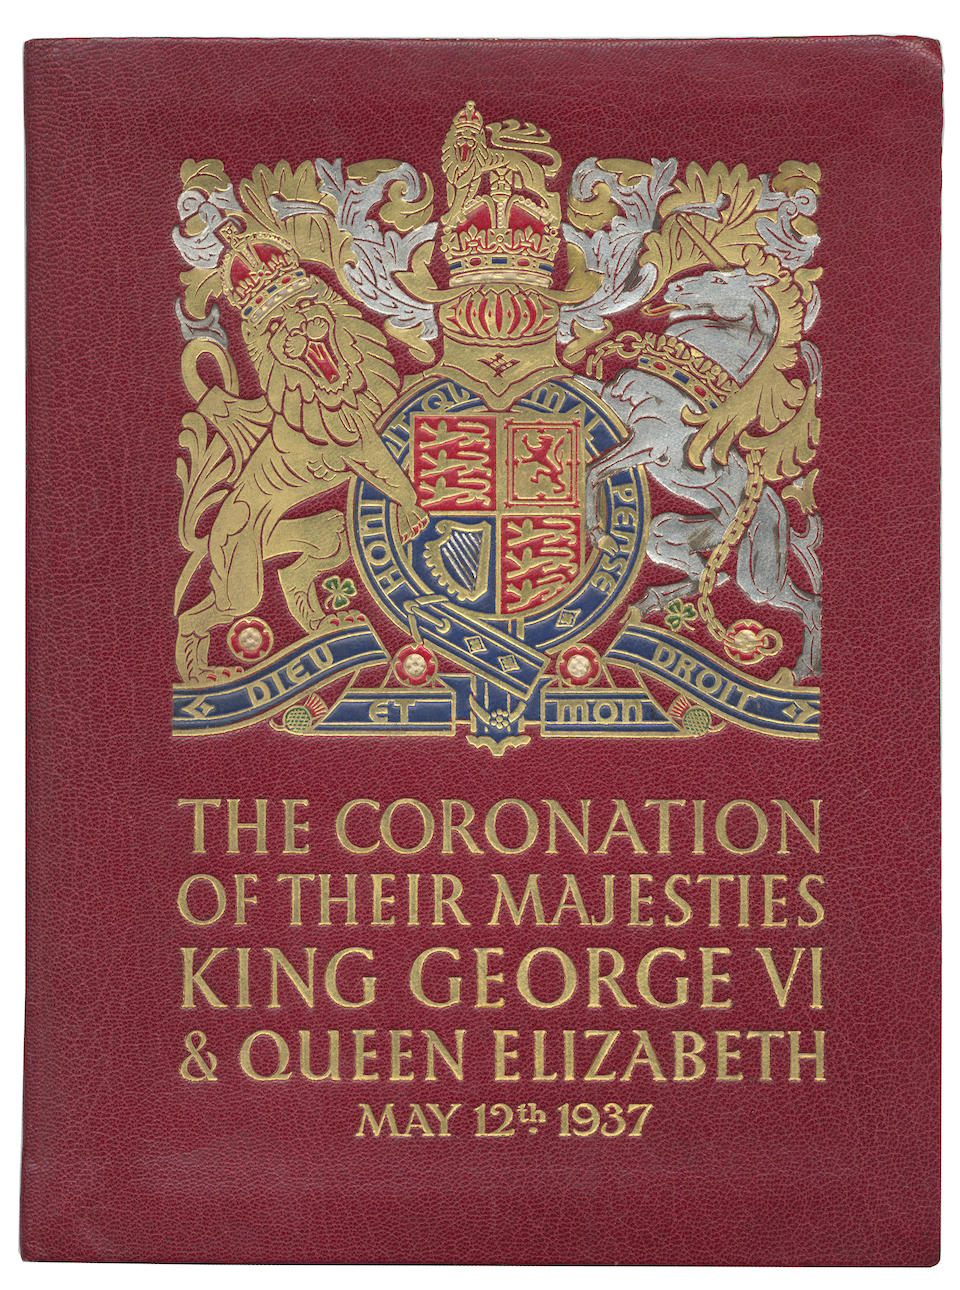 EDWARD VIII CORONATION. Proof cover of the Official Souvenir Programme for the Coronation of His Majesty King Edward VIII, [1936]; with other associated items